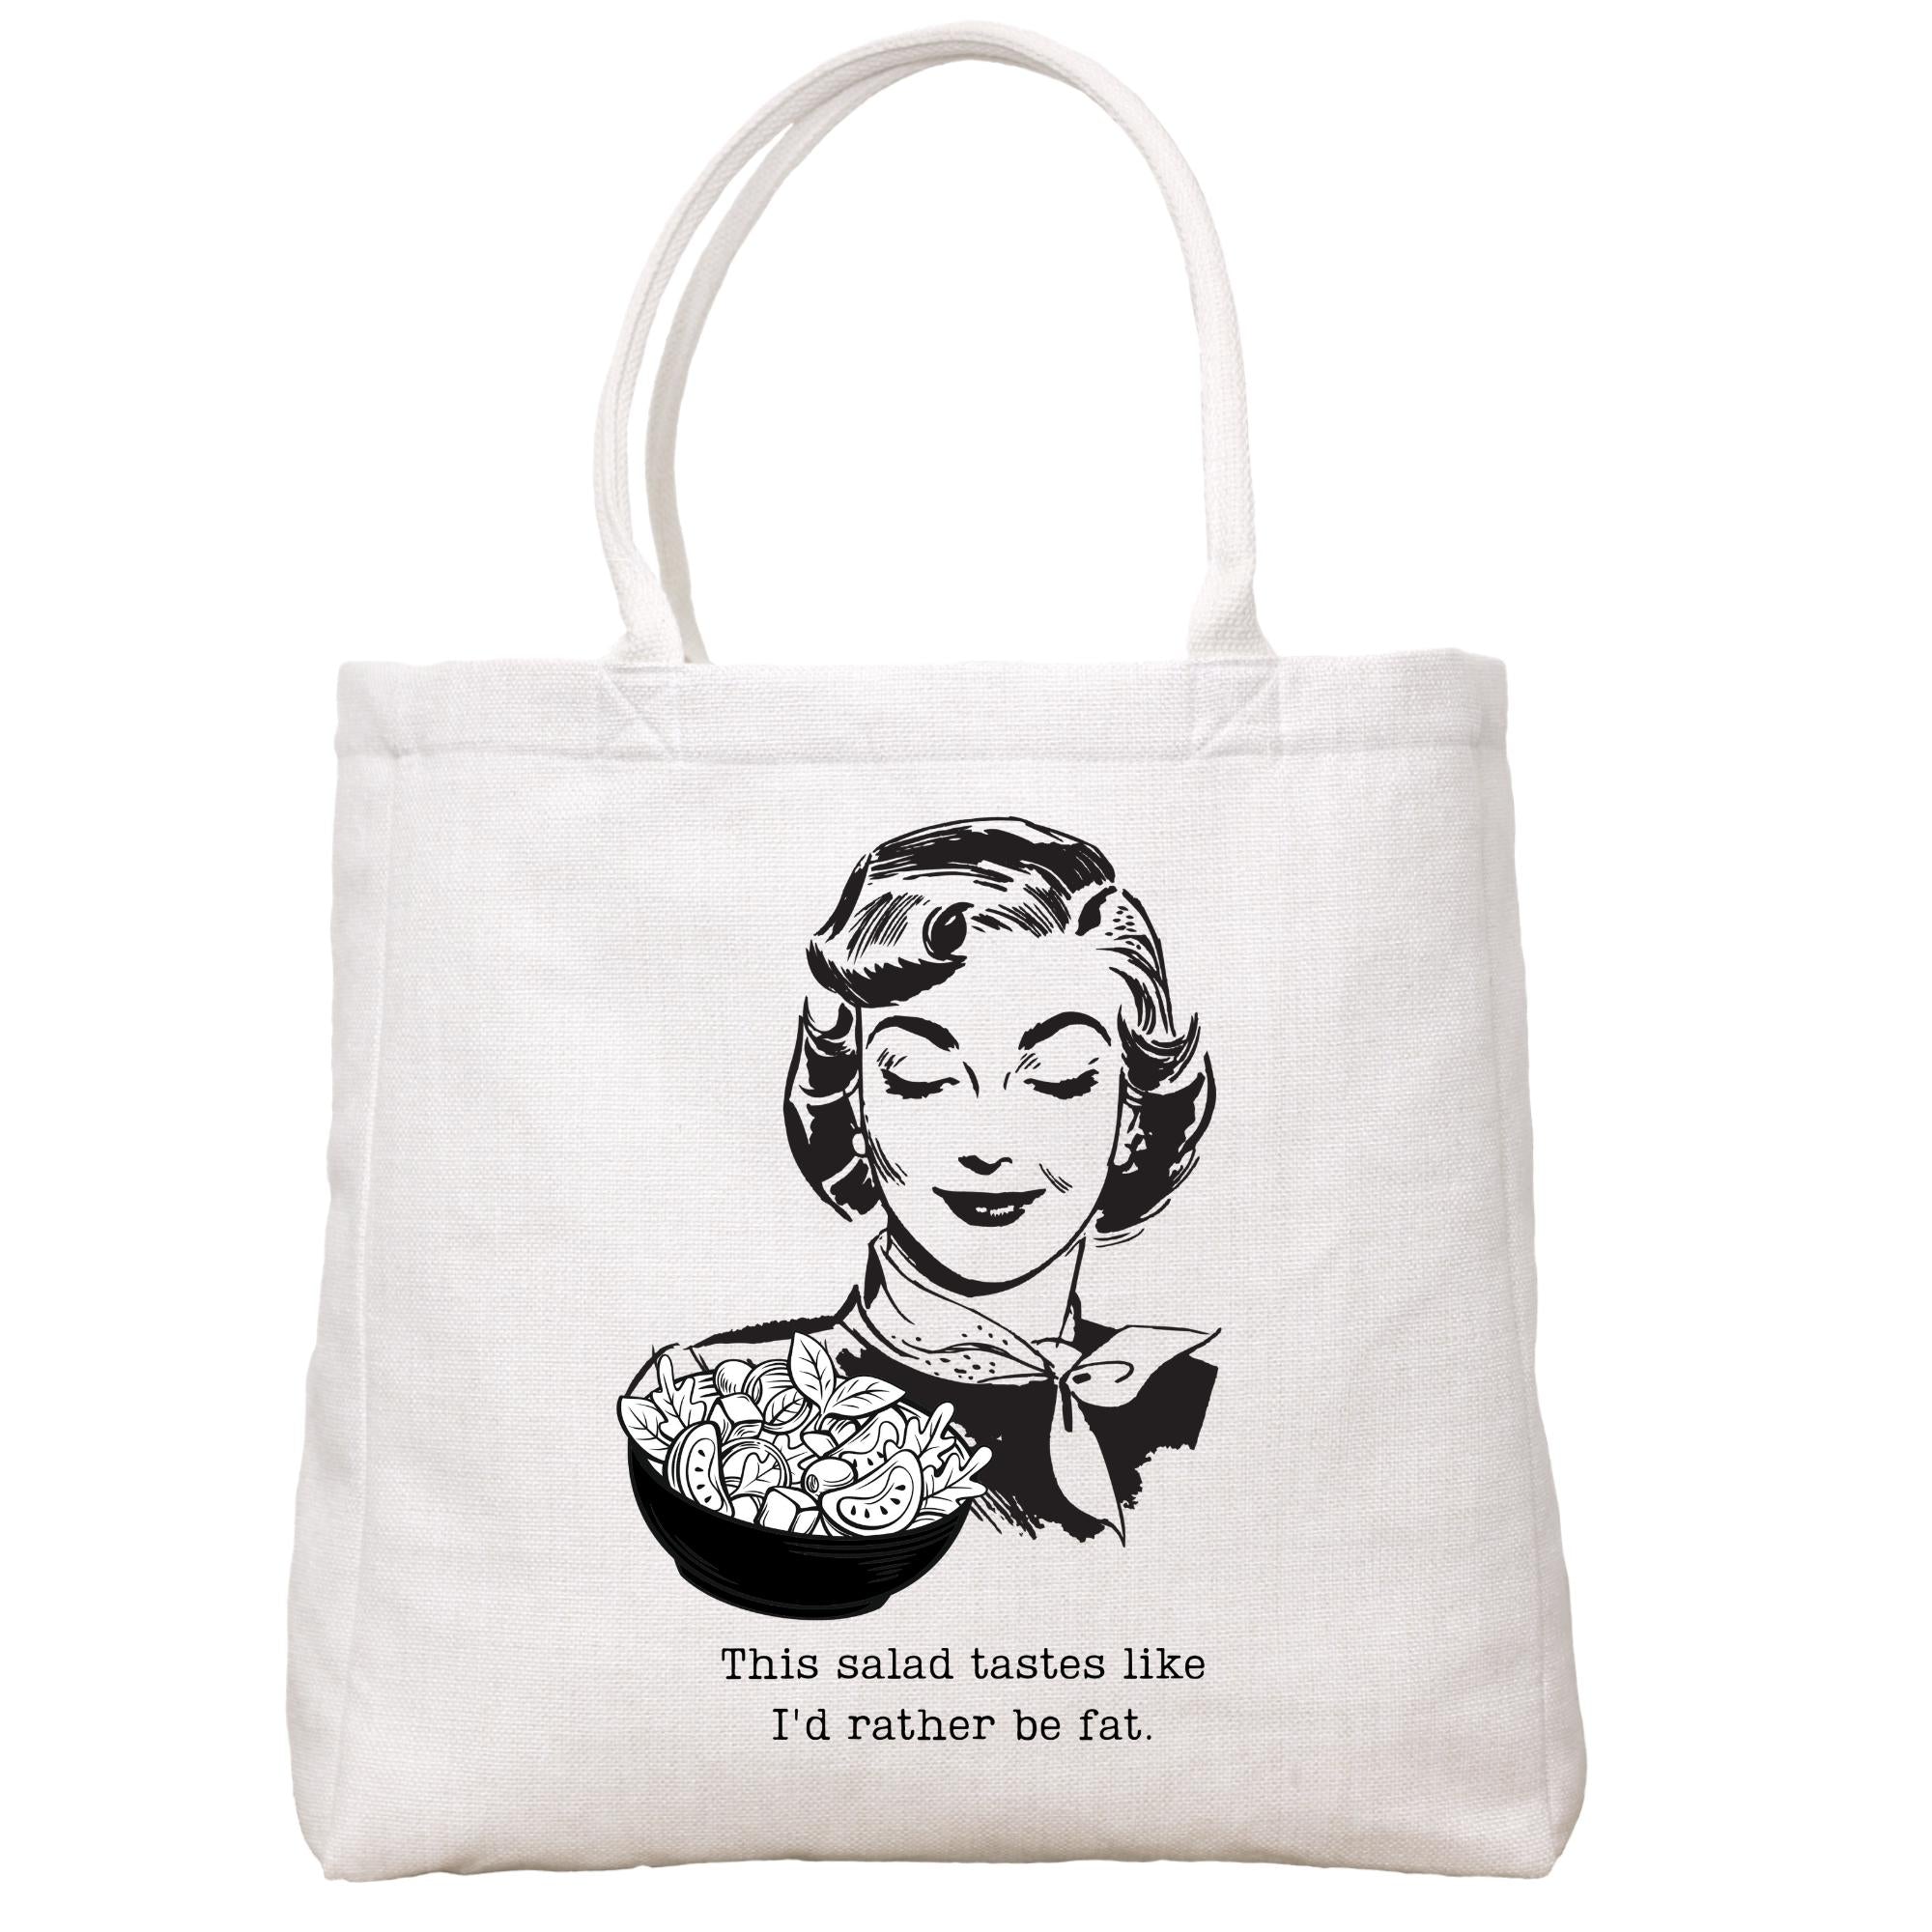 Rather Be Fat Tote Bag Tote Bag - Southern Sisters